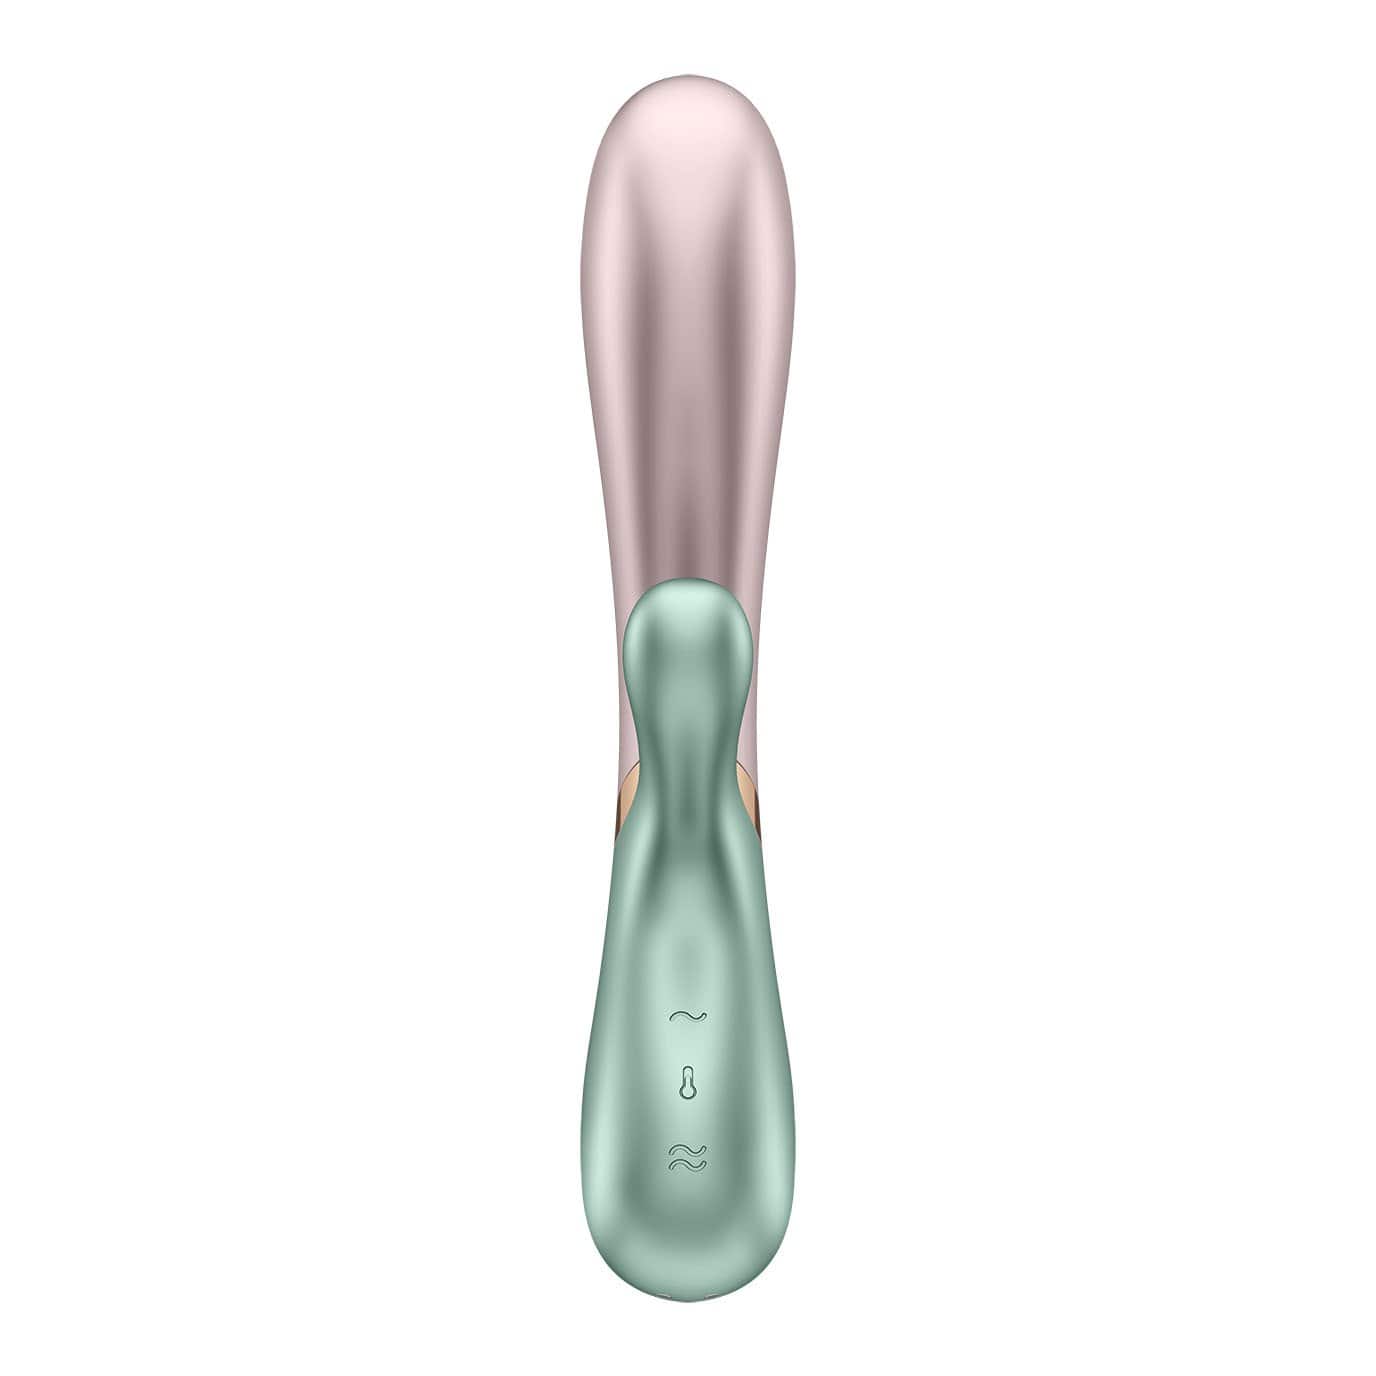 Satisfyer - Hot Lover Warming Rabbit Vibrator with Bluetooth and App (Pink/Mint) Rabbit Dildo (Vibration) Rechargeable 520219916 CherryAffairs